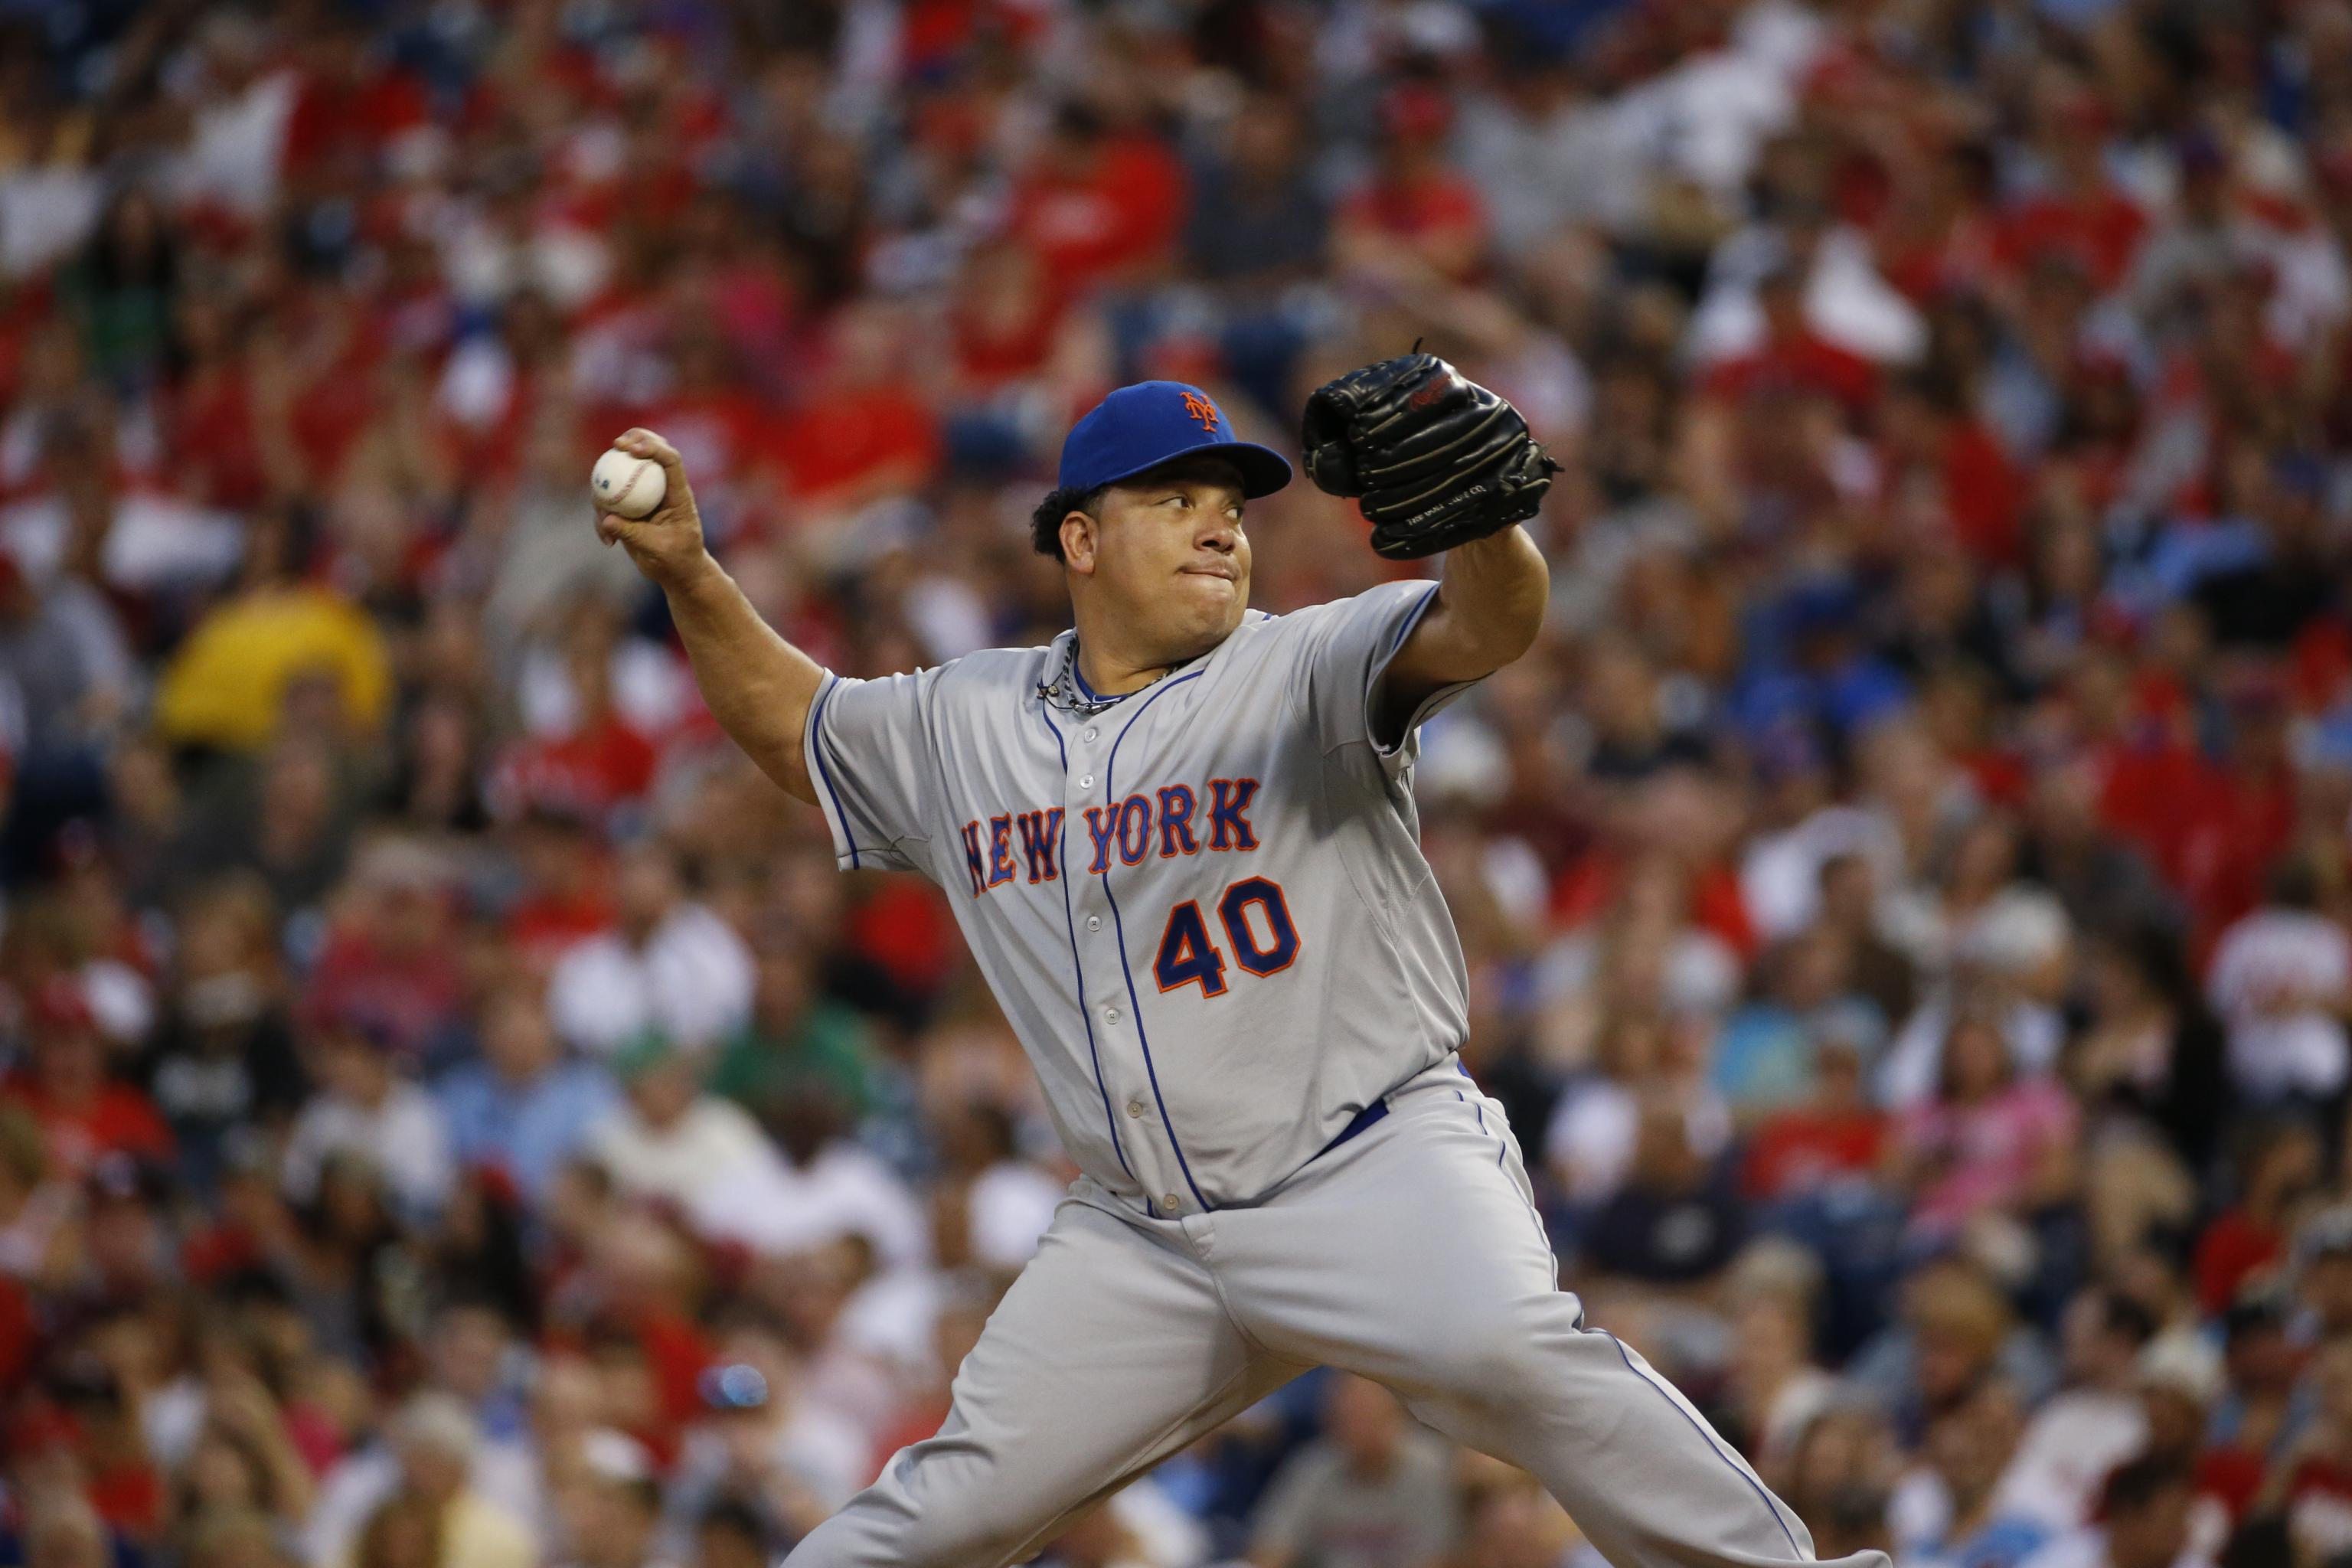 Bartolo Colon sets mark for most MLB wins by Dominican pitcher (244)